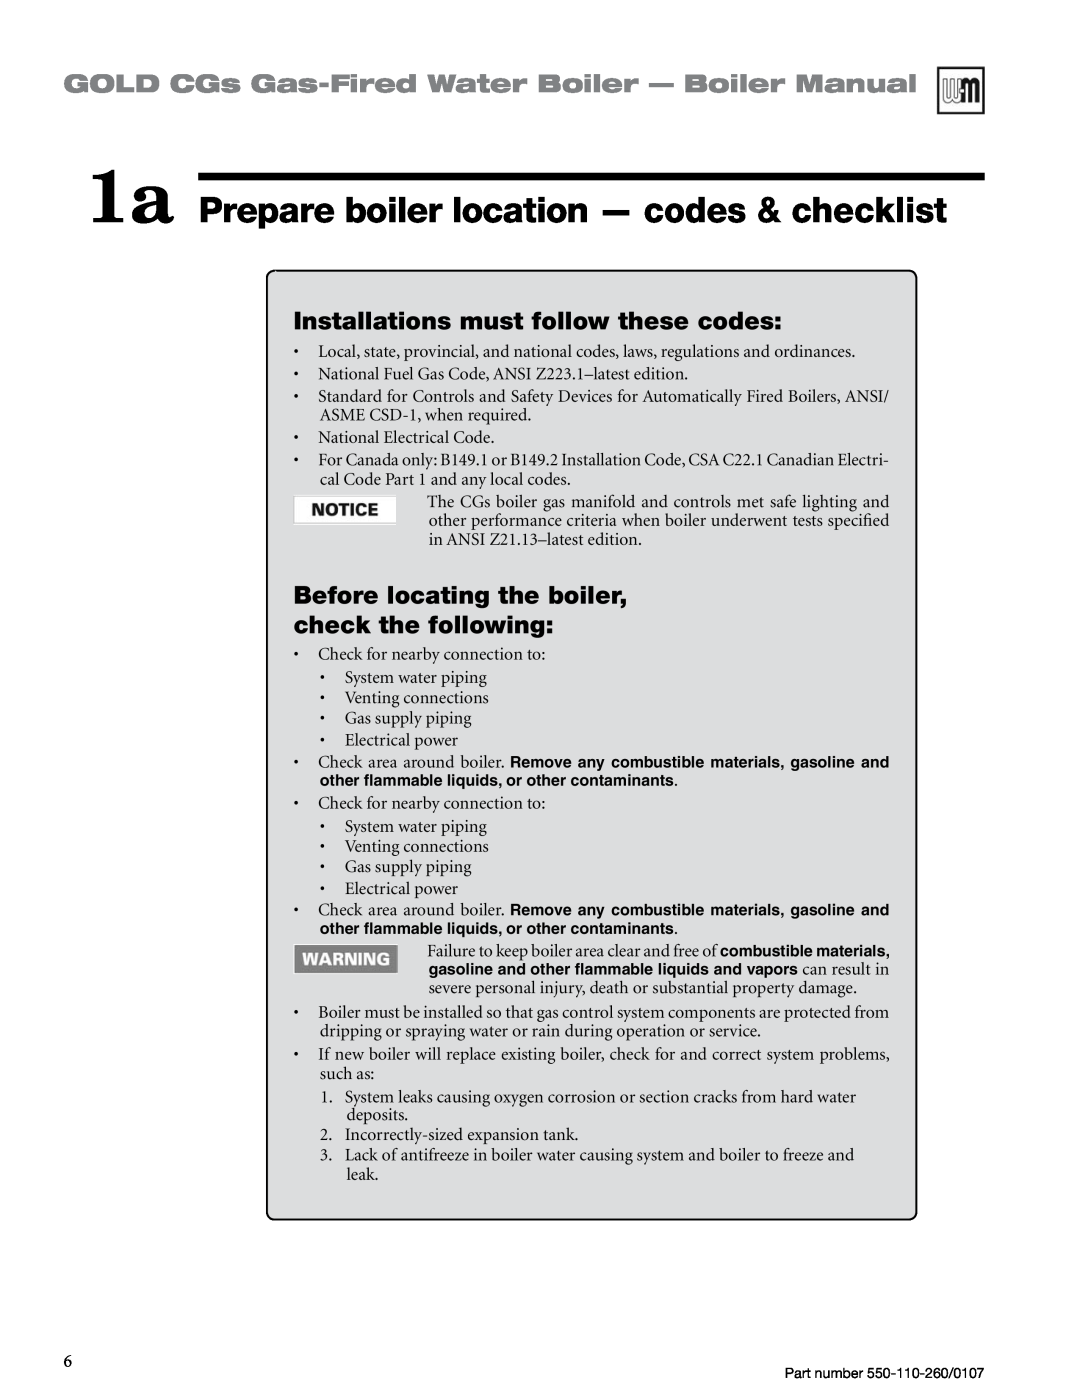 Weil-McLain 550-110-260/0107 manual 1a Prepare boiler location — codes & checklist, Installations must follow these codes 